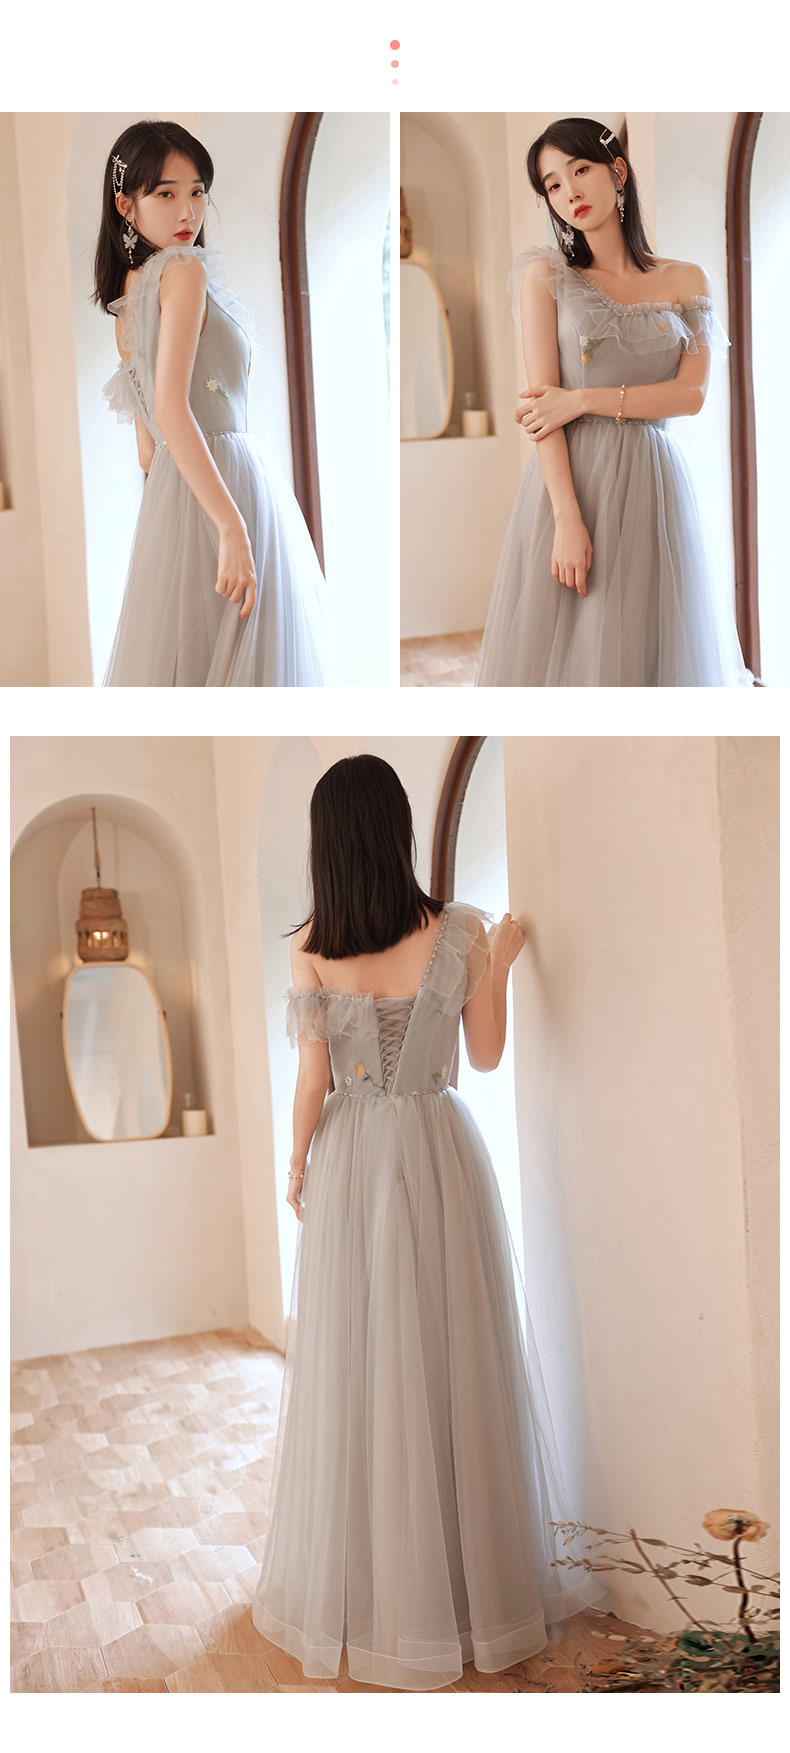 Womens-A-line-Gray-Floral-Bridal-Party-Evening-Bridesmaid-Dress22.jpg